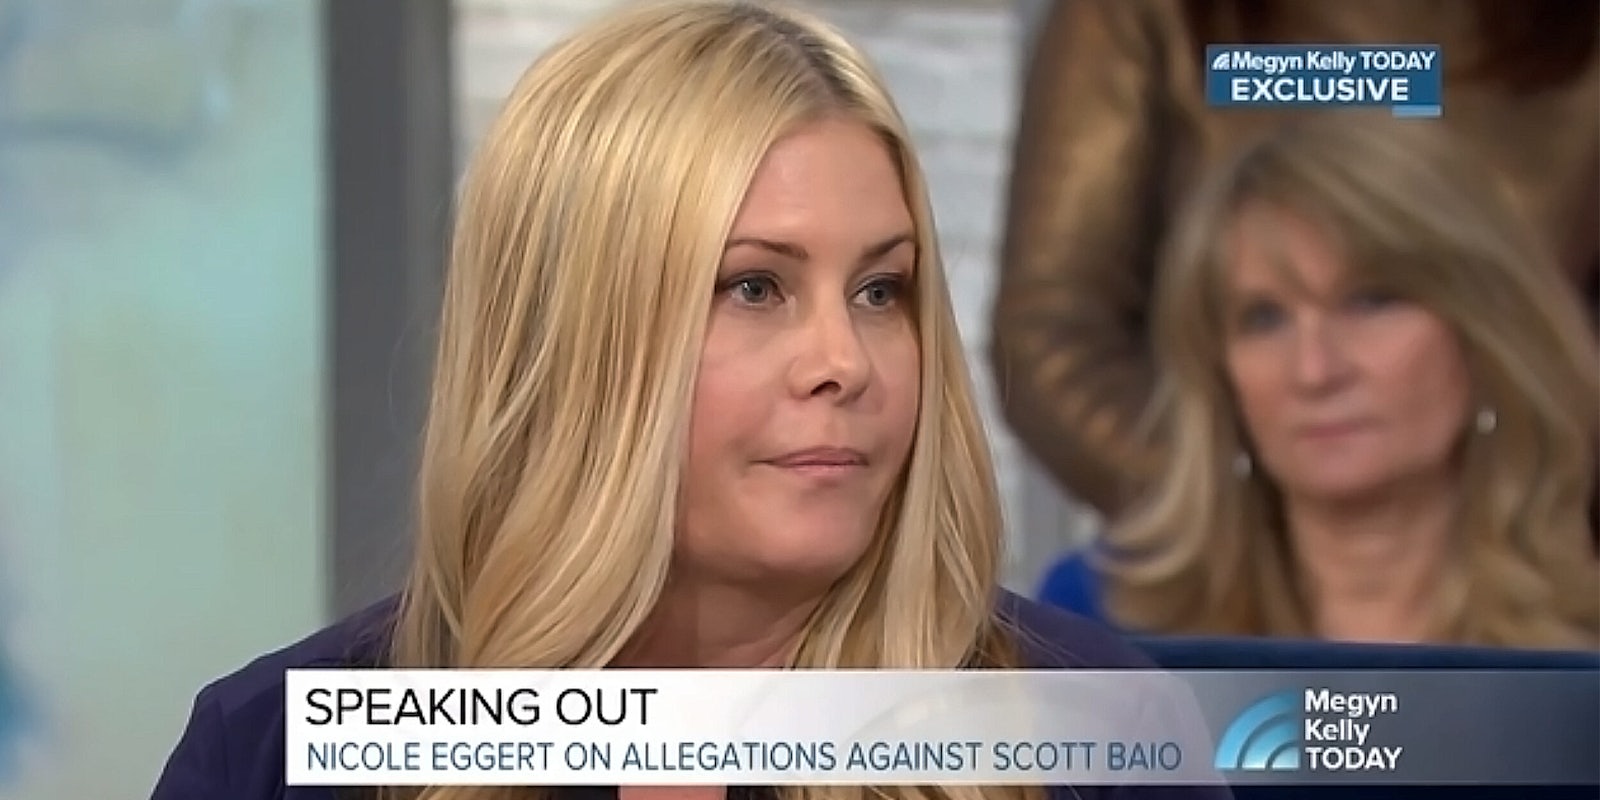 Nicole Eggert speaks out about Scott Baio allegations on Megyn Kelly TODAY